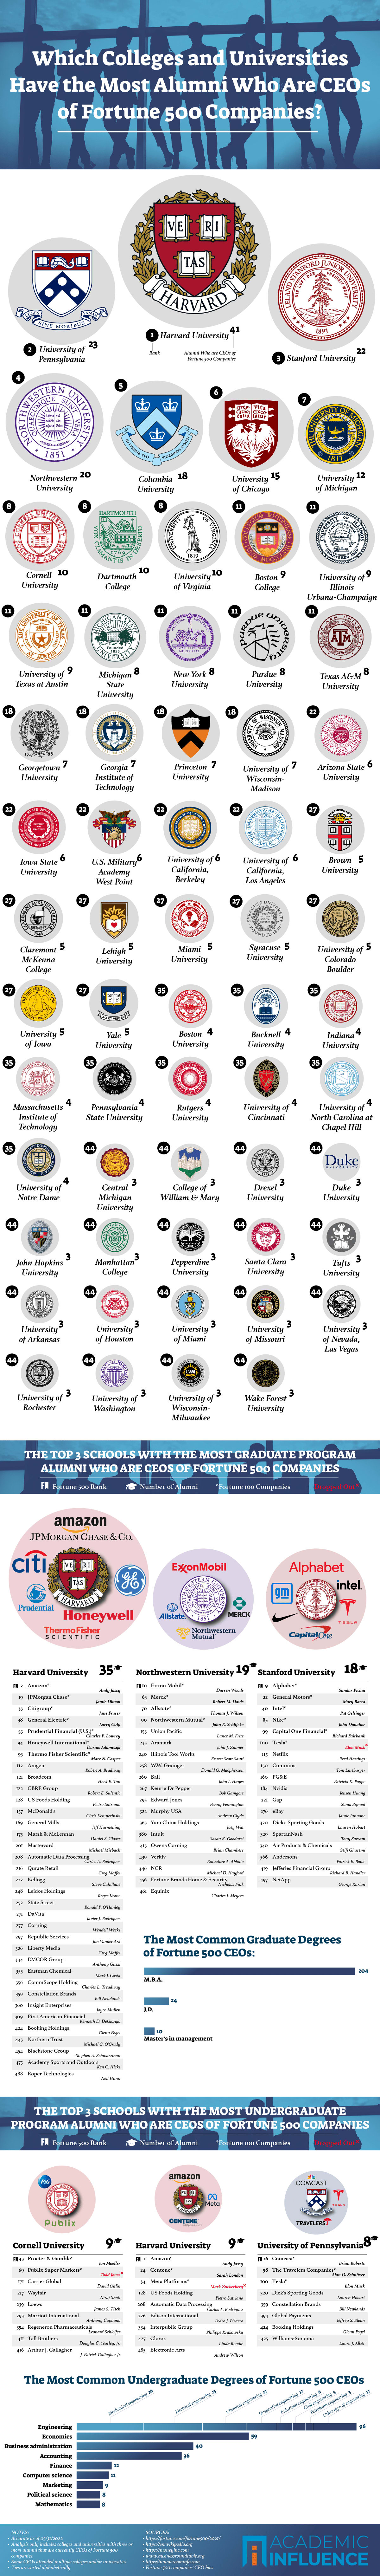 Which Colleges and Universities Have the Most Alumni Who Are CEOs of Fortune 500 Companies? - Academic Influence School Rankings - Infographic